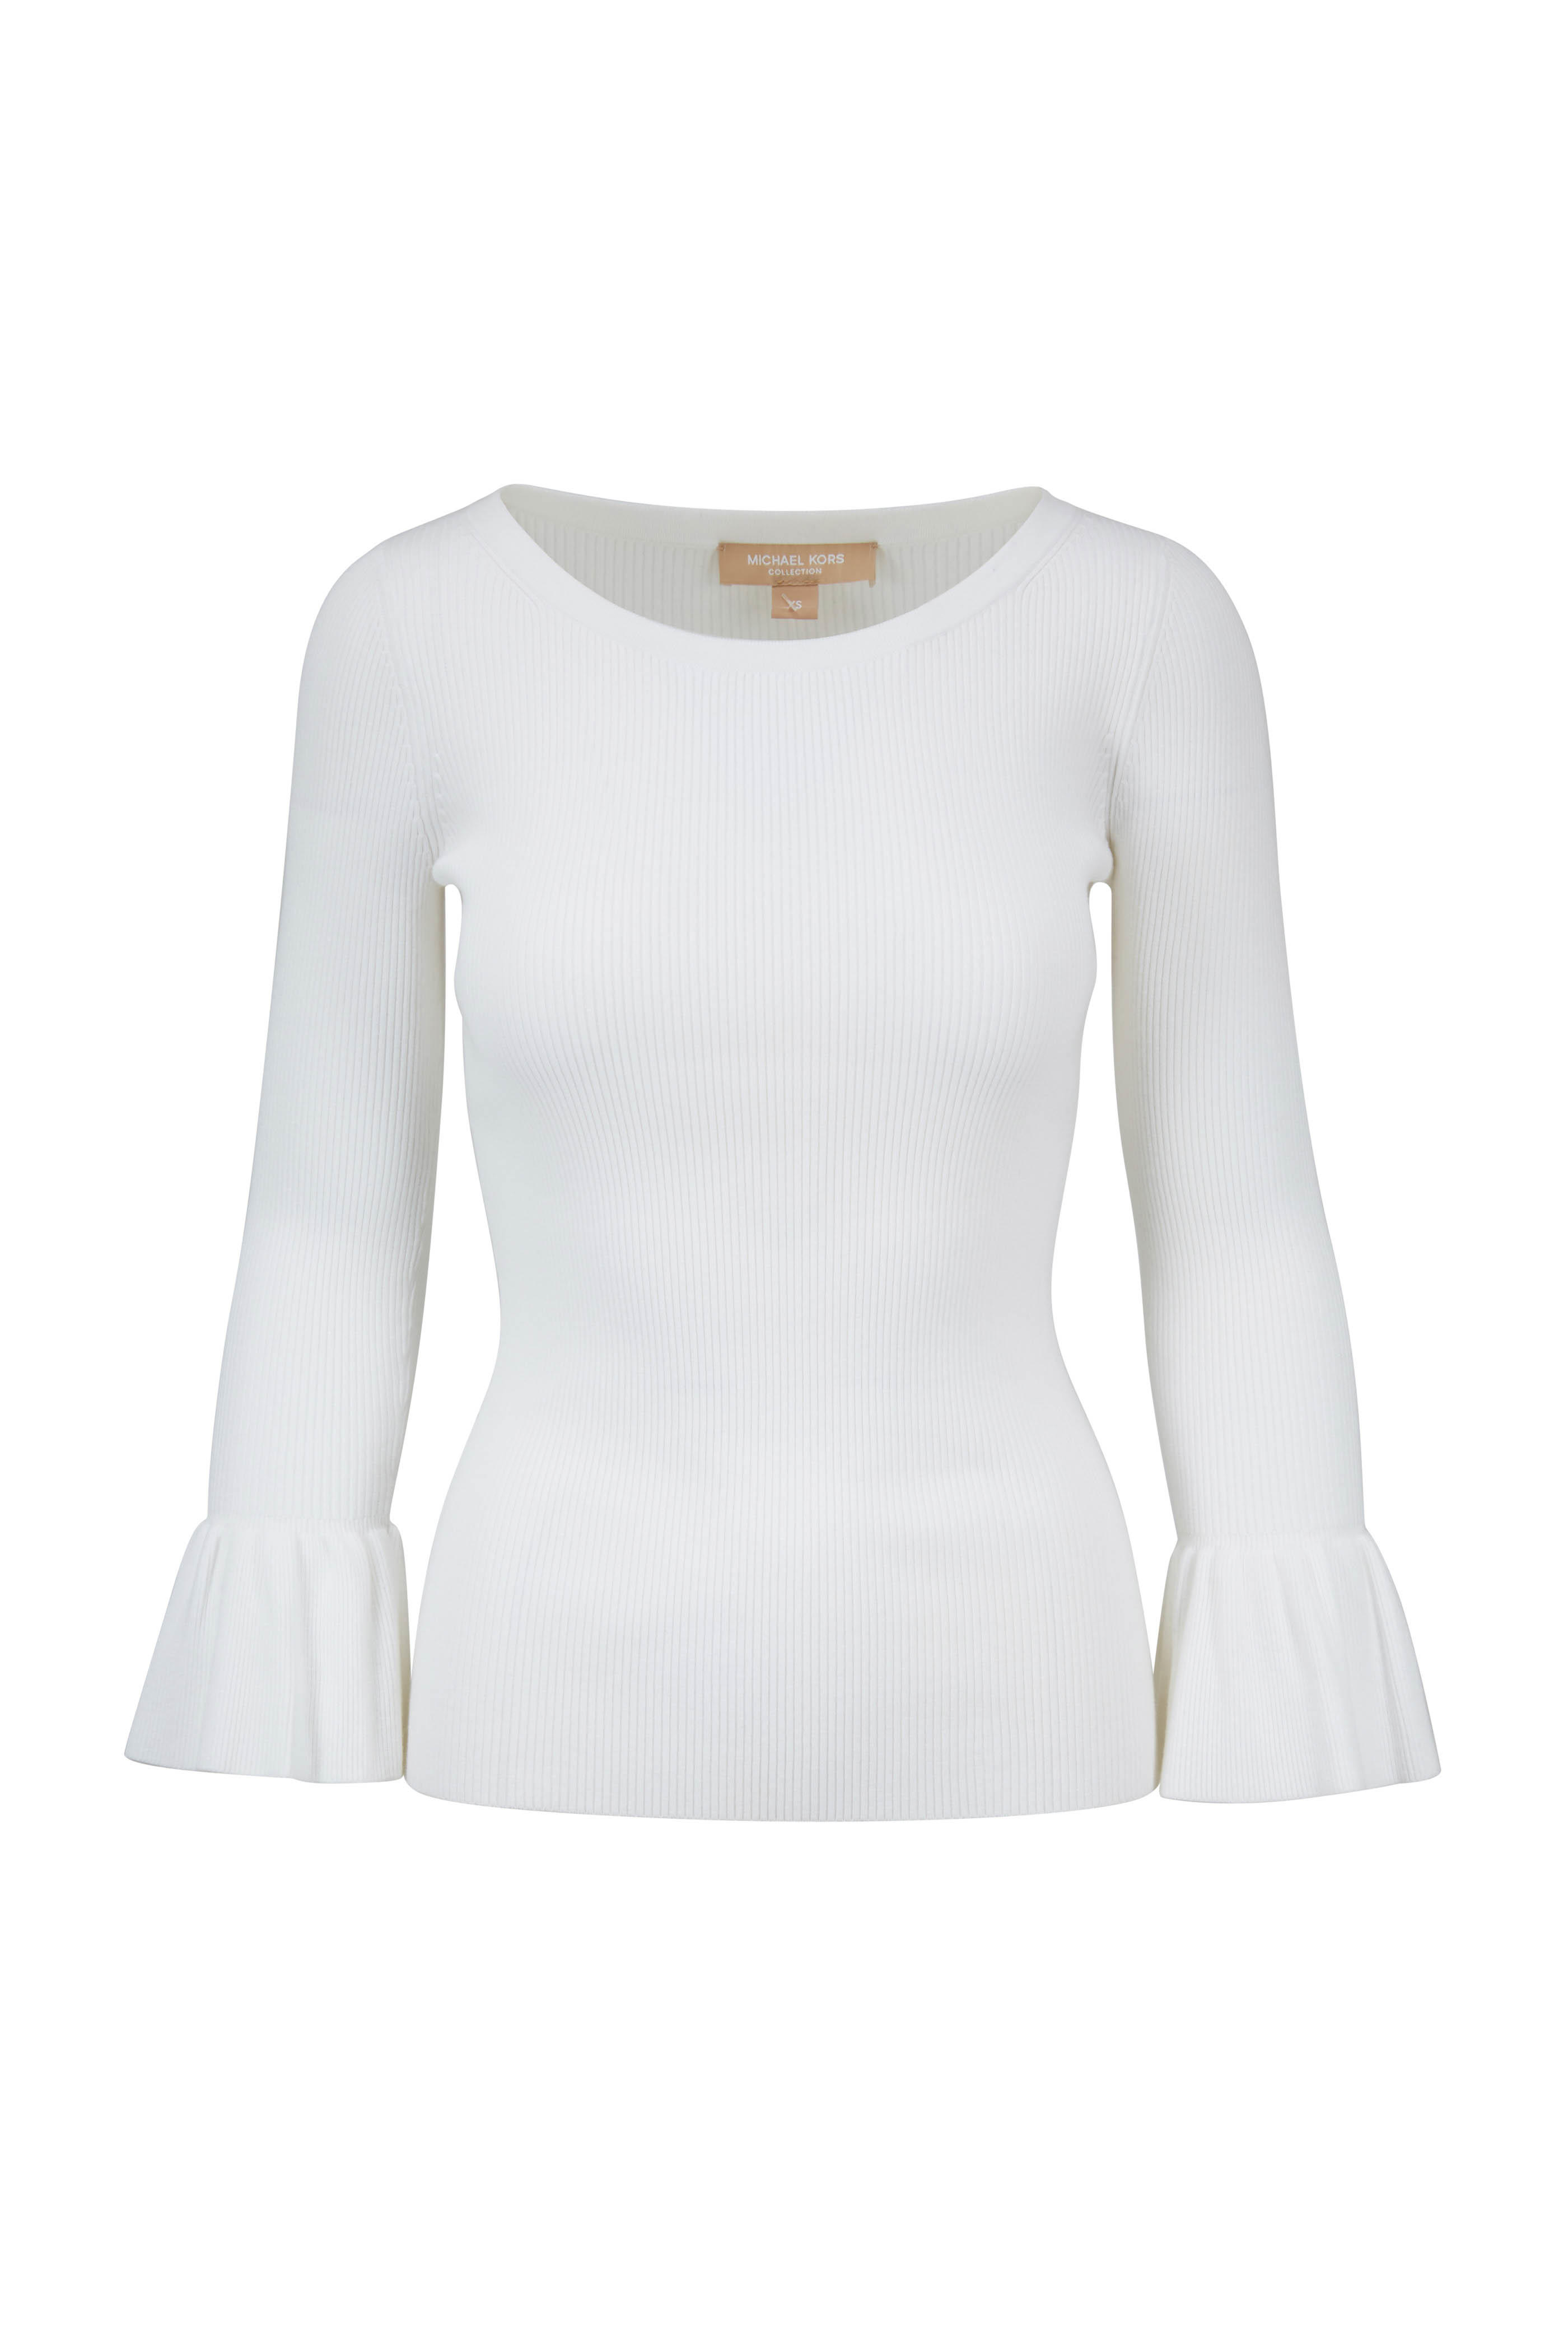 Michael Kors Collection Optic White Cuff Sweater | Mitchell Stores